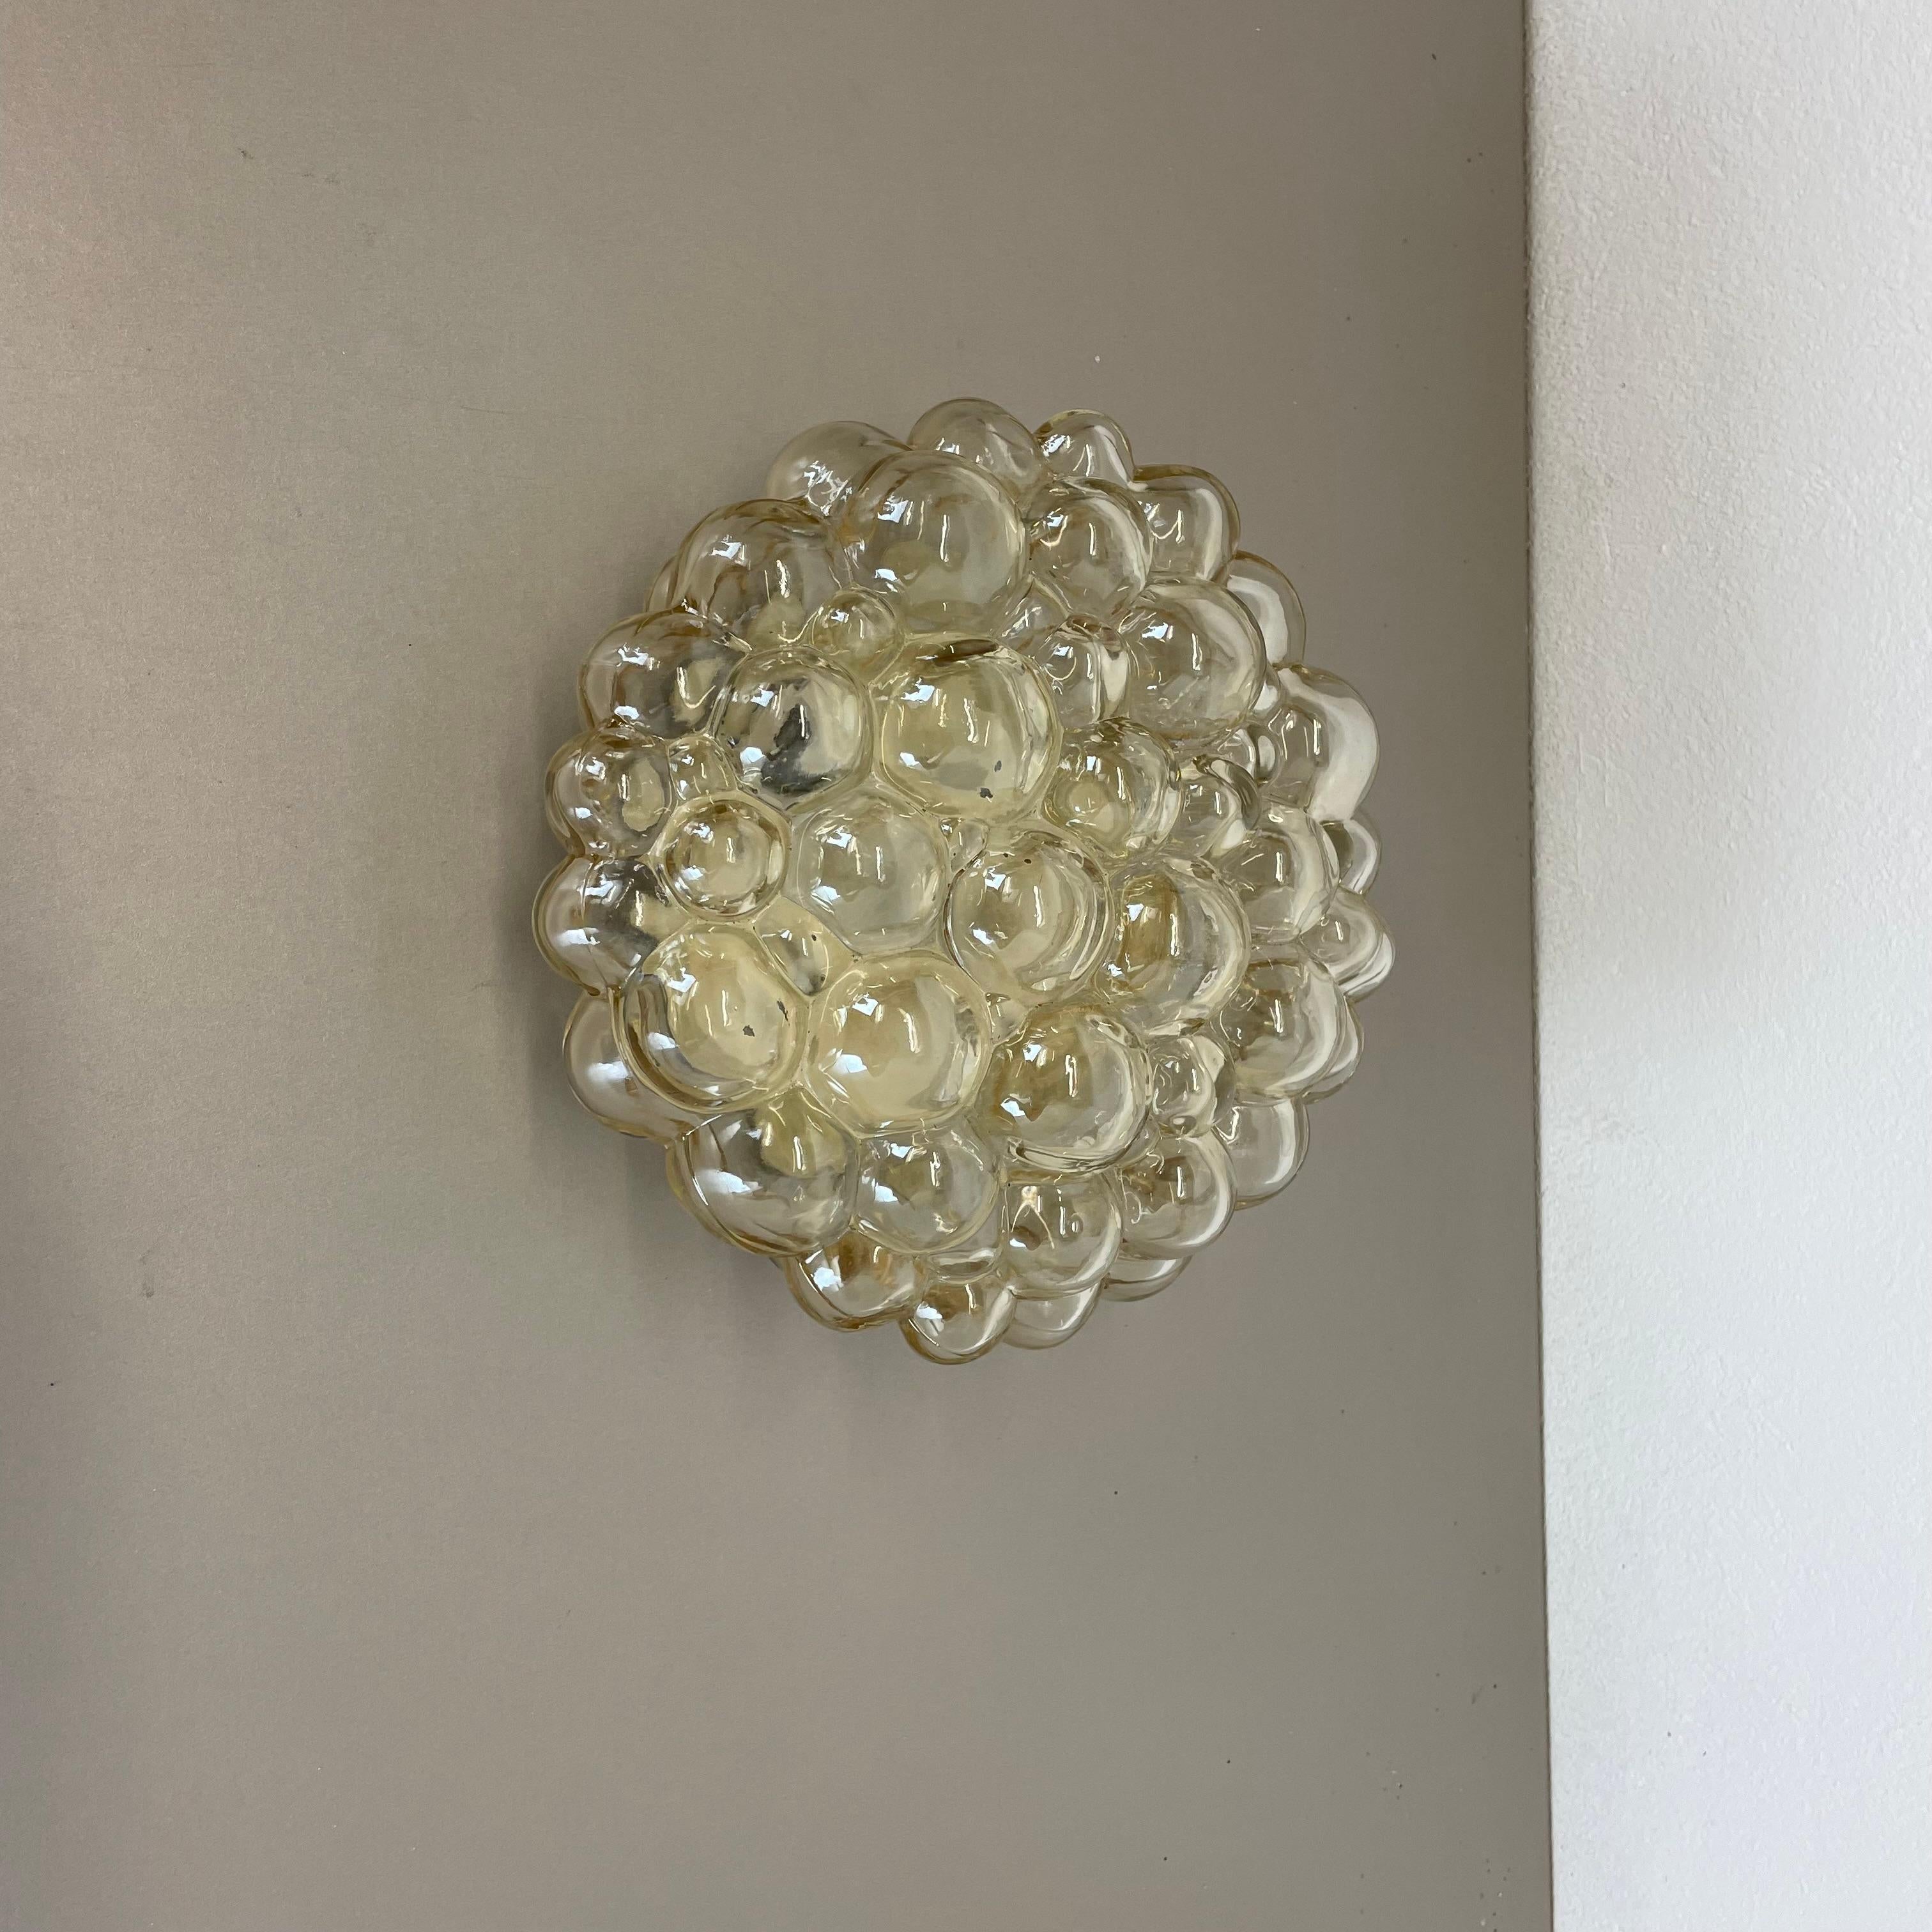 Article:

wall light | ceiling light



Producer: 

Glashütte Limburg, Germany


Design:

Helena Tynell


Origin: 

Germany


Age: 

1960s





This fantastic glass wall | ceiling light was designed by Helena Tynell and produced in 1960s in Germany